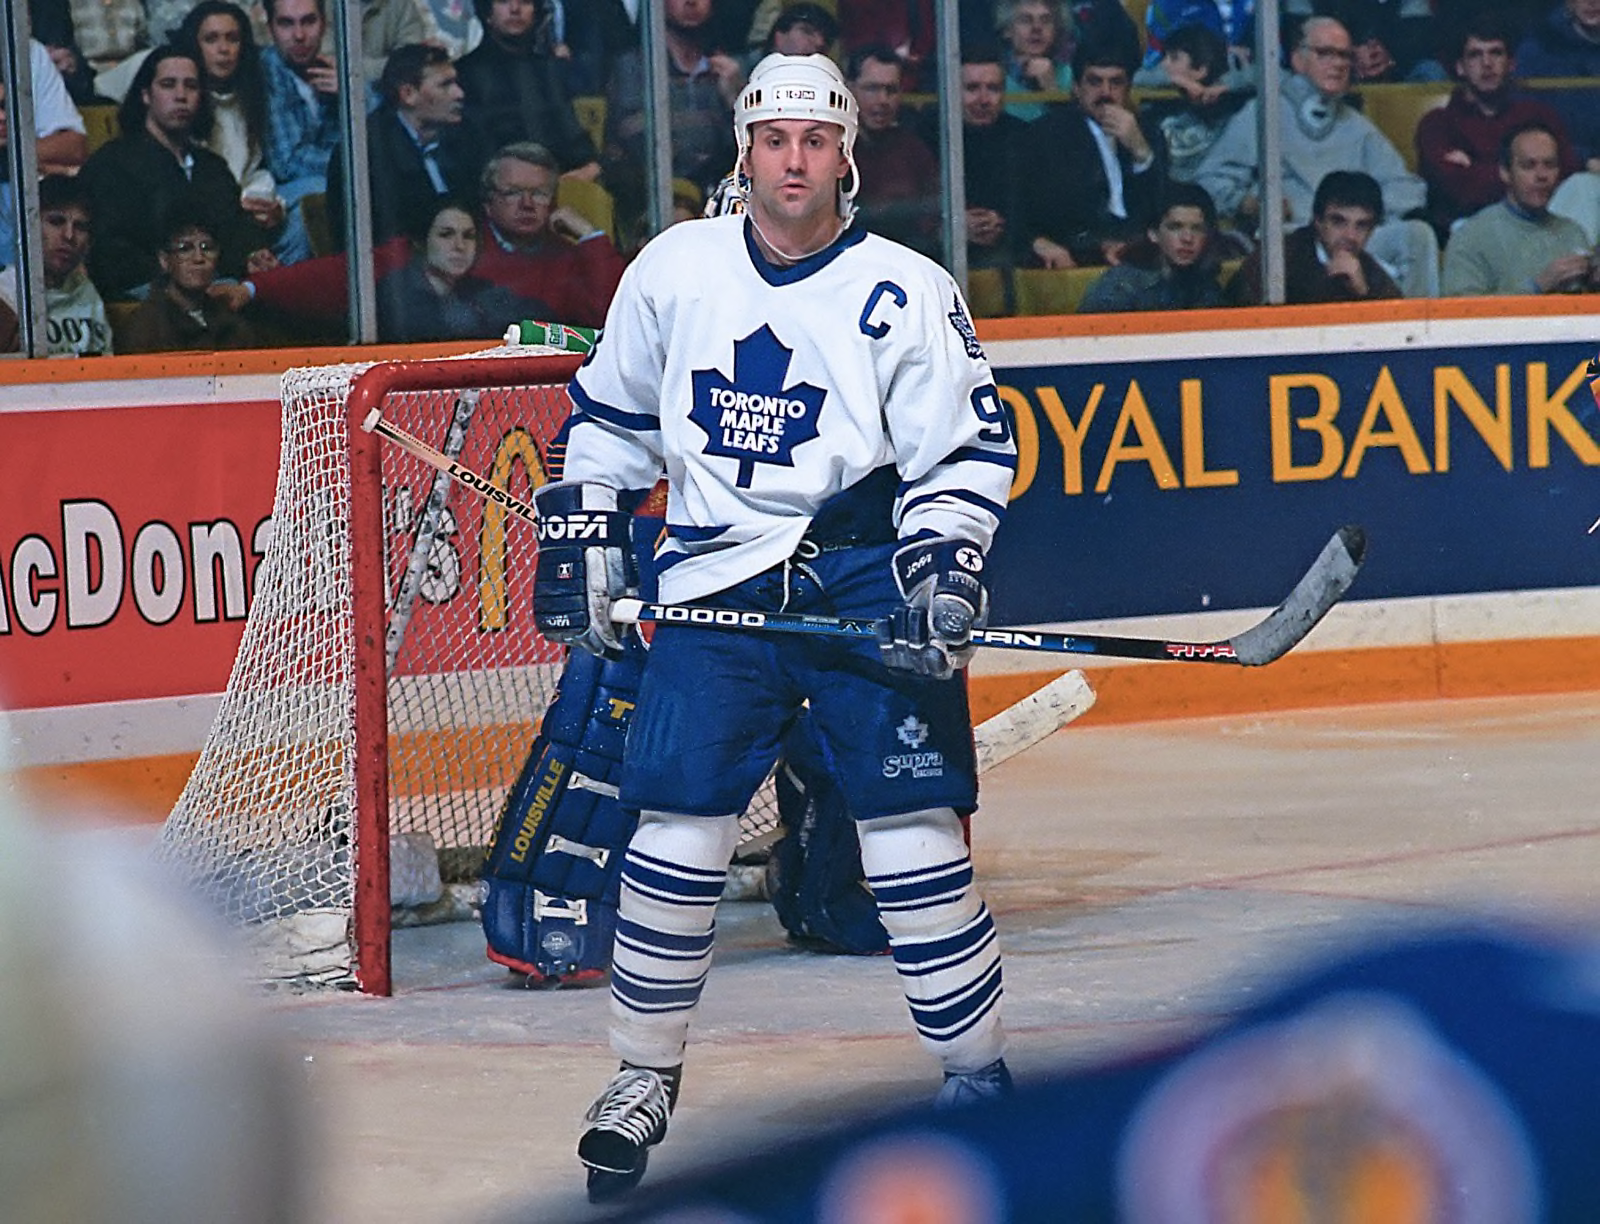 Brett Hull of the St. Louis Blues skates against the Toronto Maple News  Photo - Getty Images